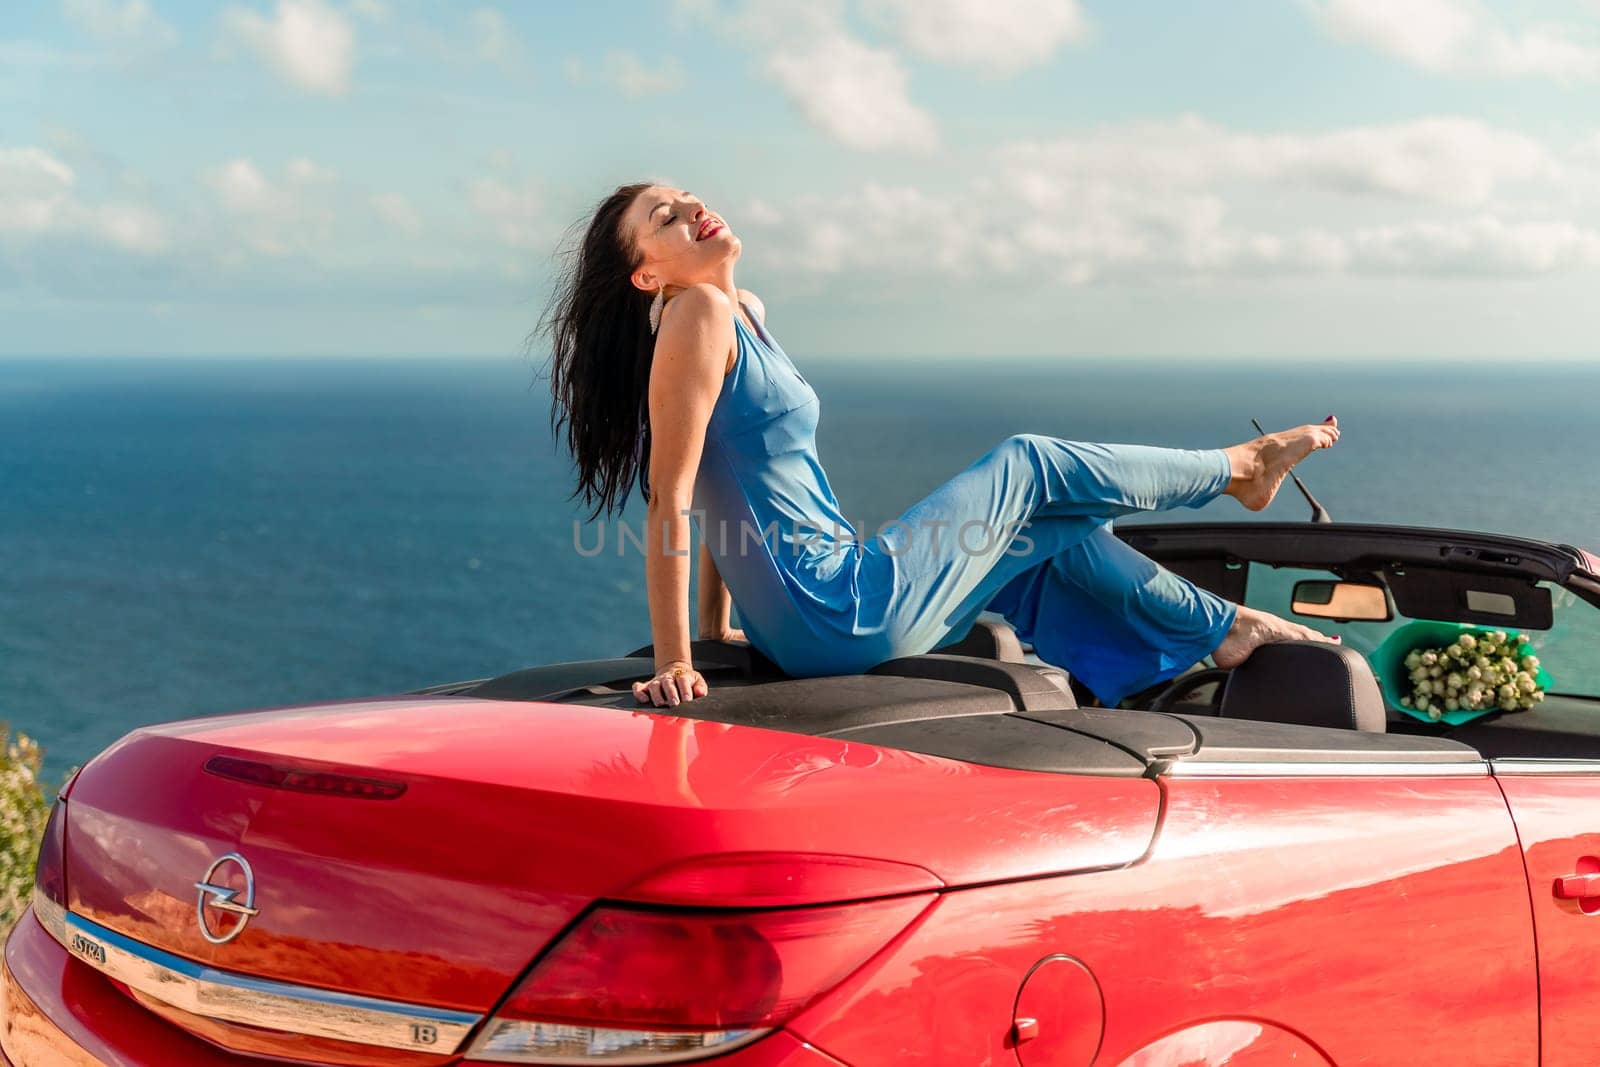 A woman is sitting in a red convertible car, smiling and enjoying the view of the ocean. Scene is happy and relaxed